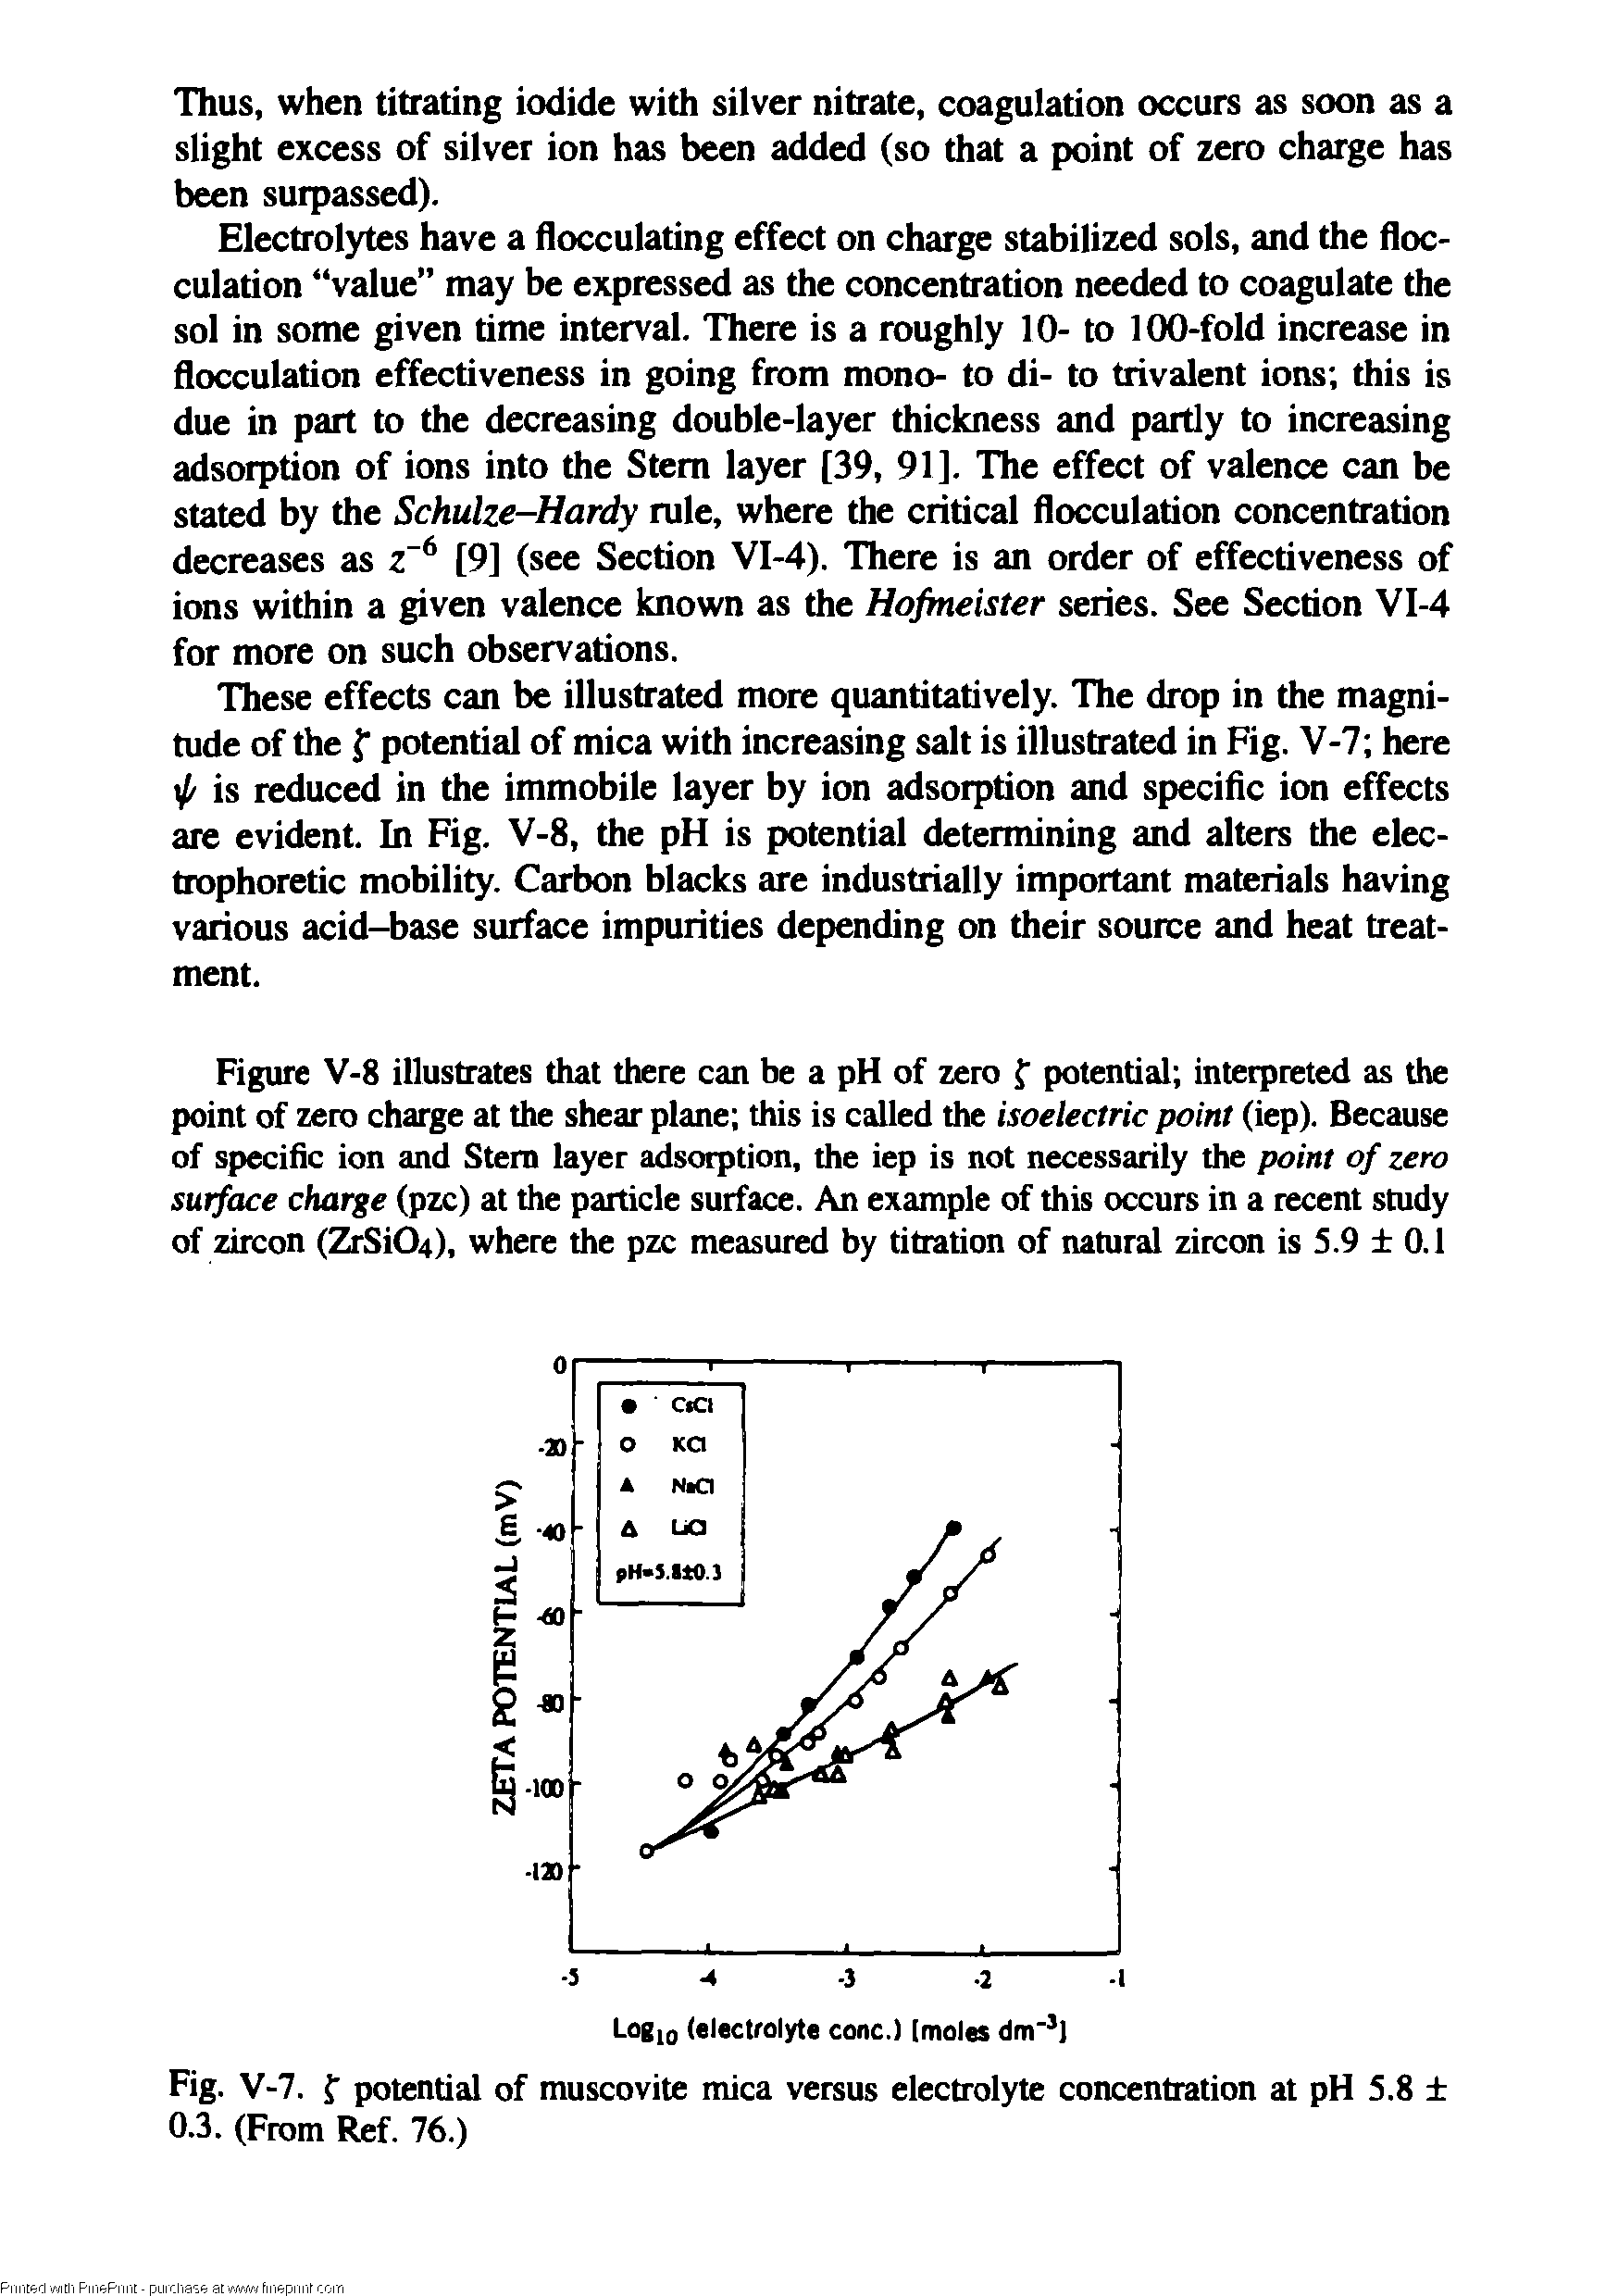 Fig. V-7. f potential of muscovite mica versus electrolyte concentration at pH 5.8 0.3. (From Ref. 76.)...